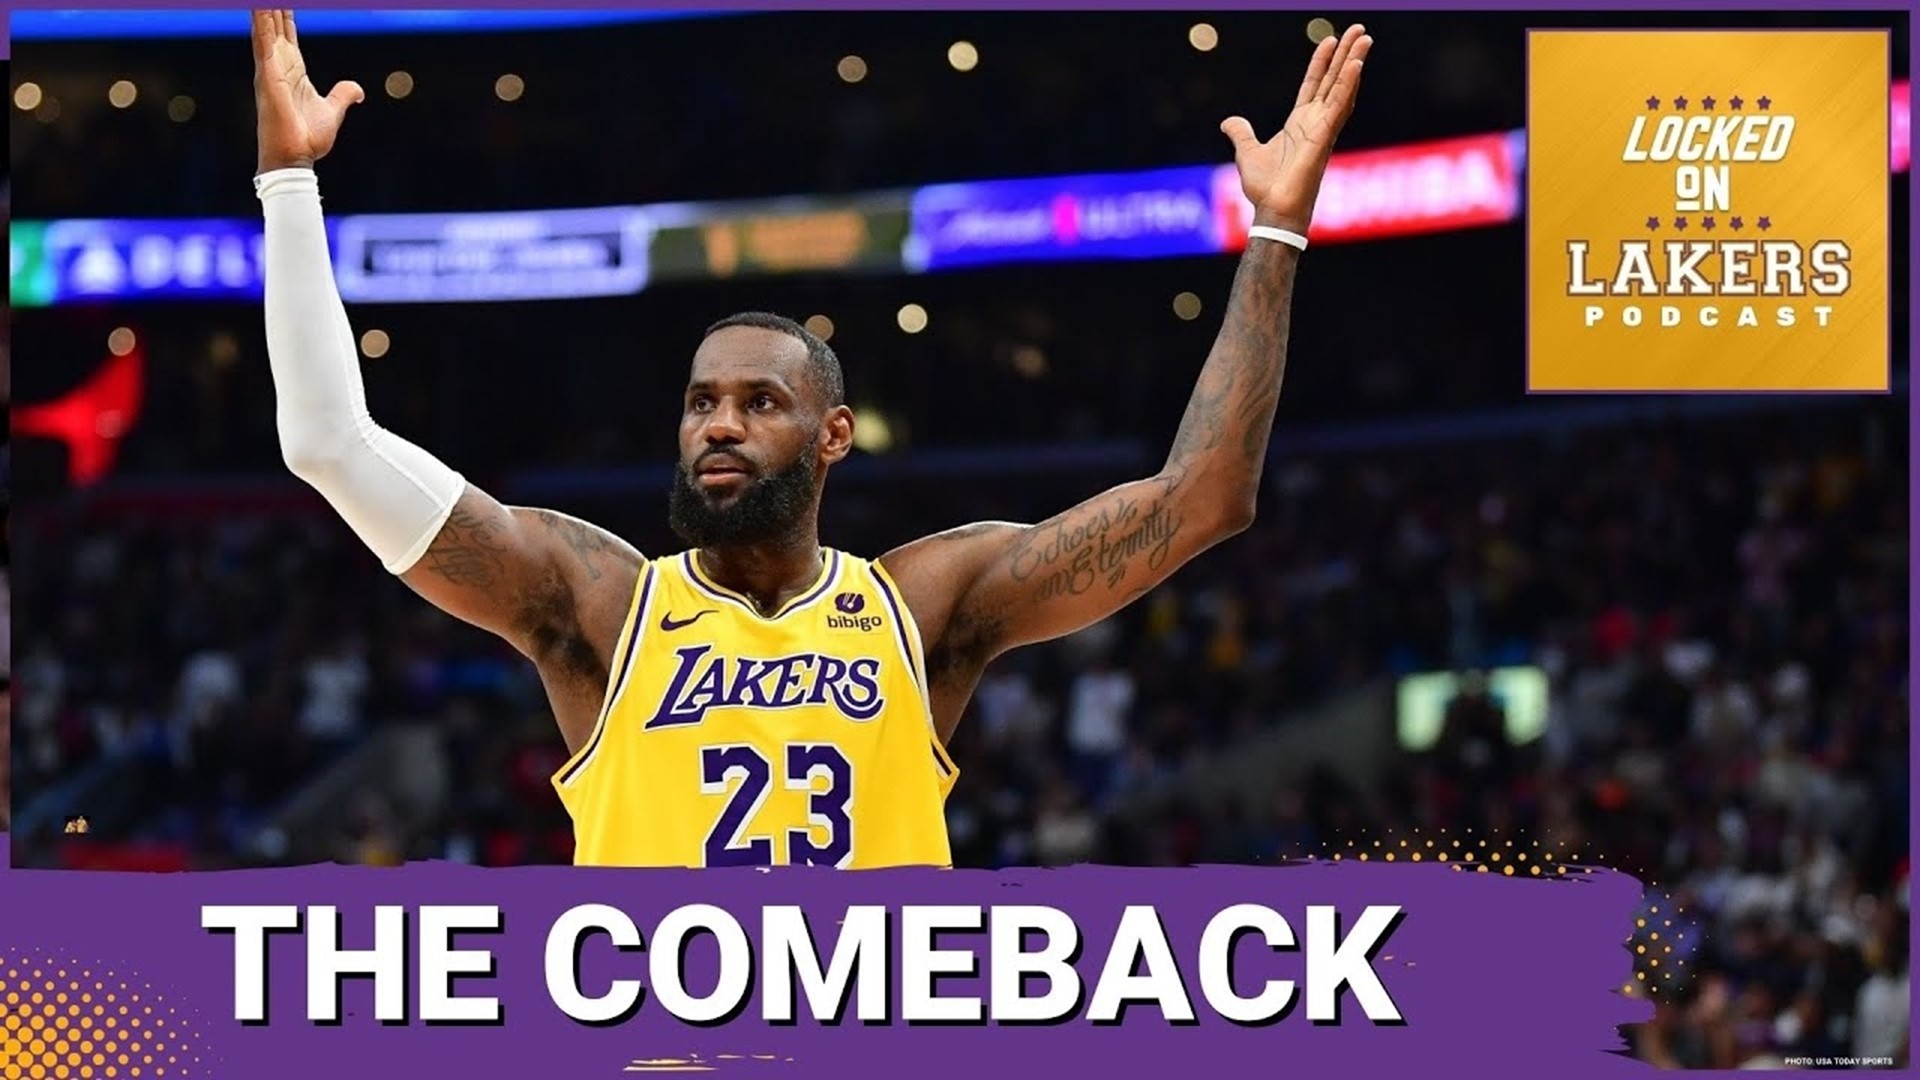 After Mason Plumlee scored the opening points of the fourth, the Lakers were down 21 points, and seemingly out of it. Nobody told LeBron James, however.